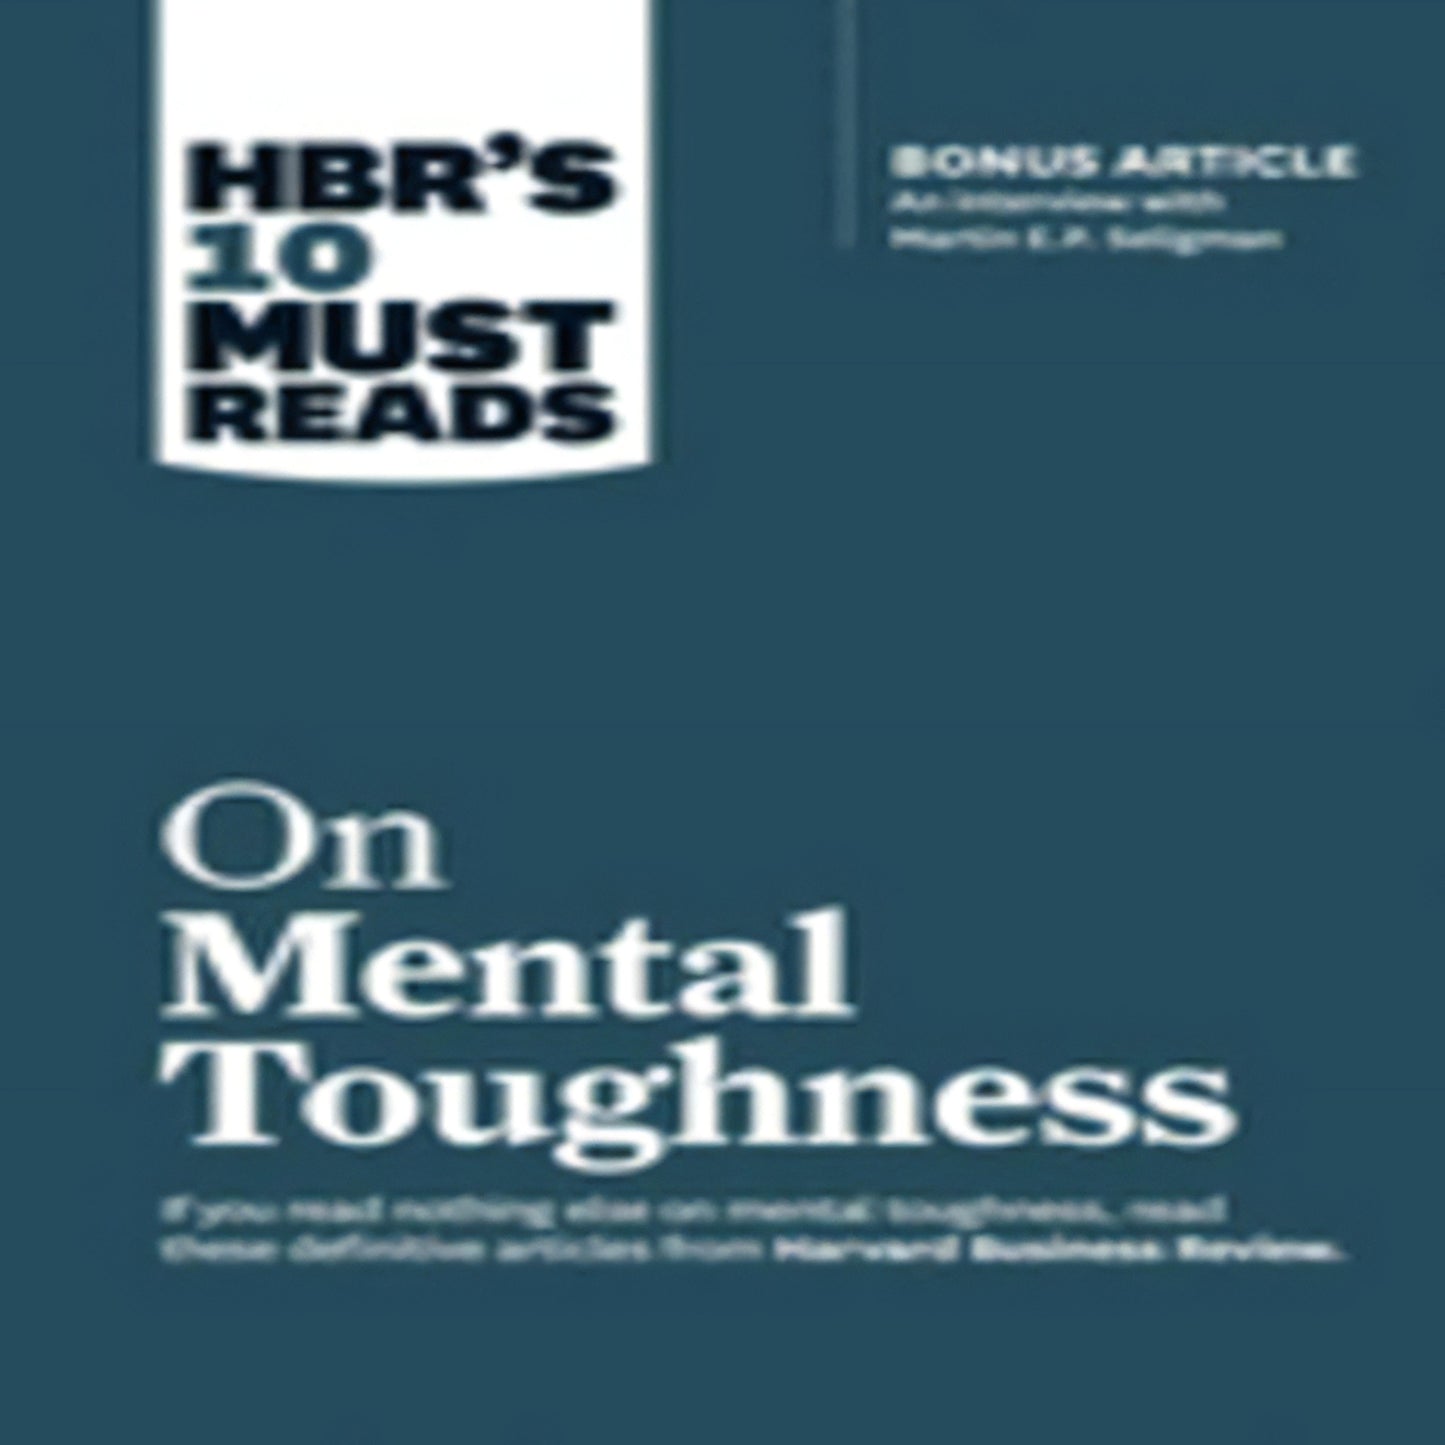 TEXTBOOK Hbr's 10 Must Reads on Mental Toughness (with Bonus Interview Post-Traumatic Growth and Building Resilience with Martin Seligman) (Hbr's 10 Must Reads (HBR's 10 Must Reads)215-031423-1633694364DPGBOOKSTORE.COM. Today's Bestsellers.